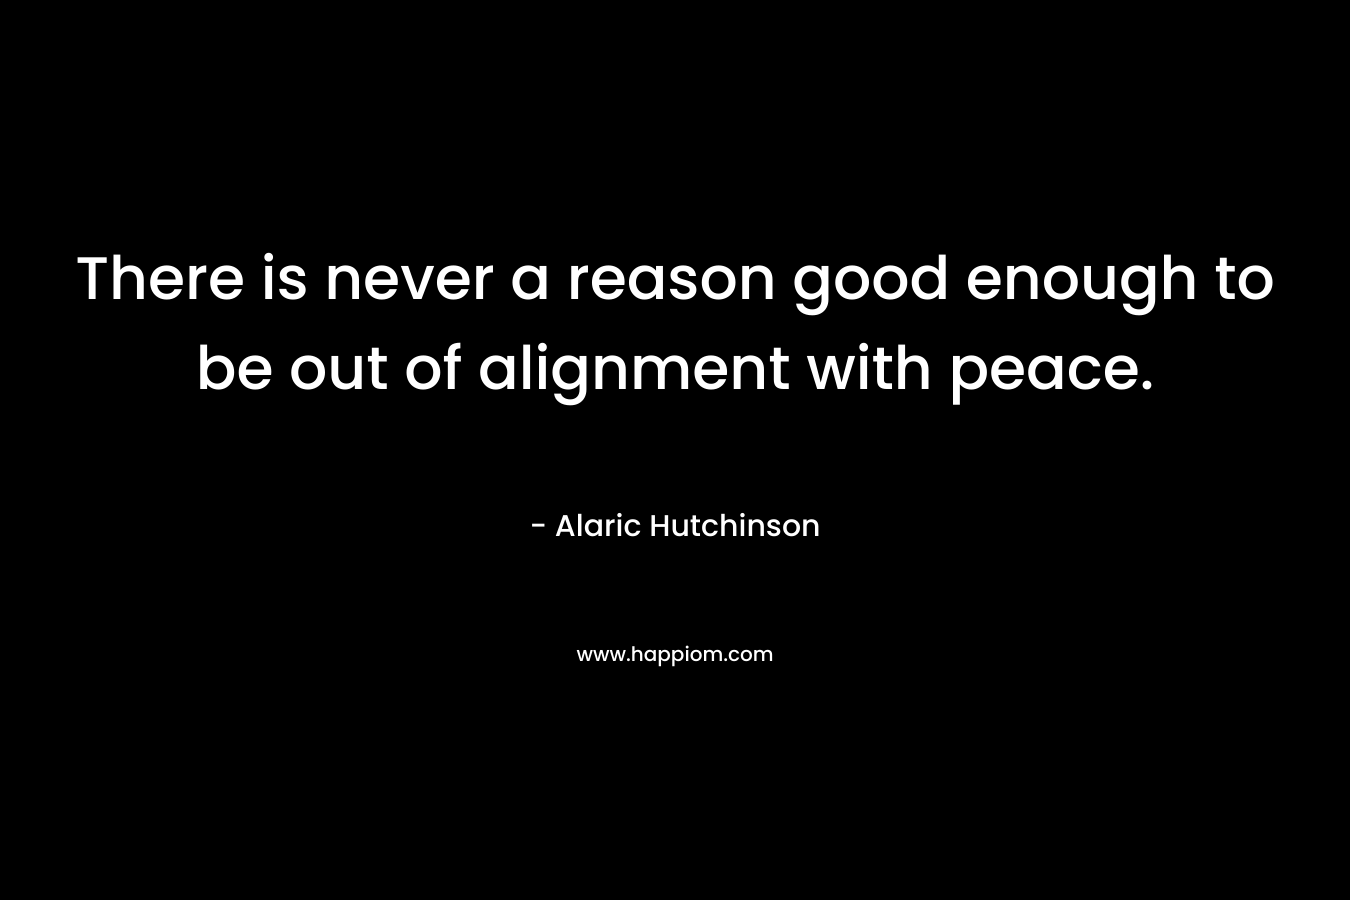 There is never a reason good enough to be out of alignment with peace. – Alaric Hutchinson